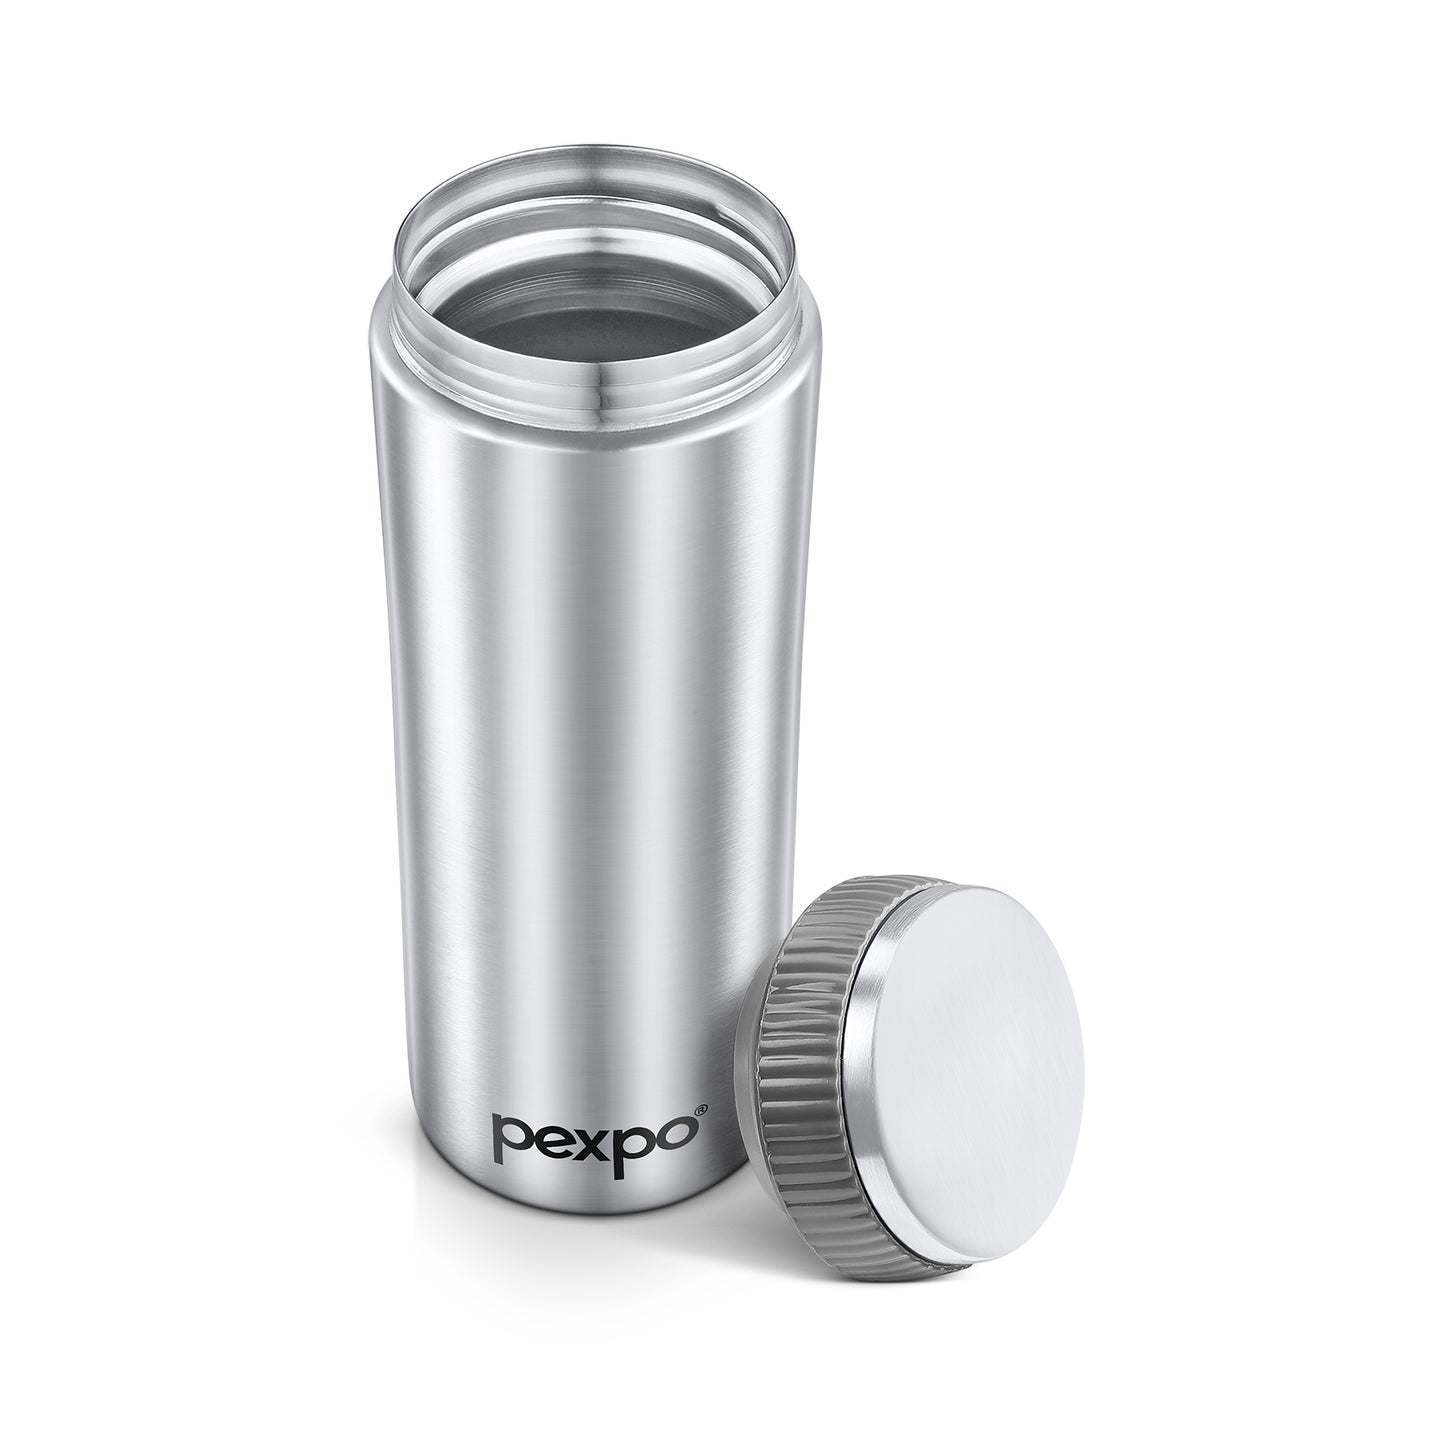 Pexpo Crypto - Stainless Steel Vacuum Insulated Water Bottle | 24/7 Hot & Cold | Leak-Proof & Eco-Friendly | ISI Certified